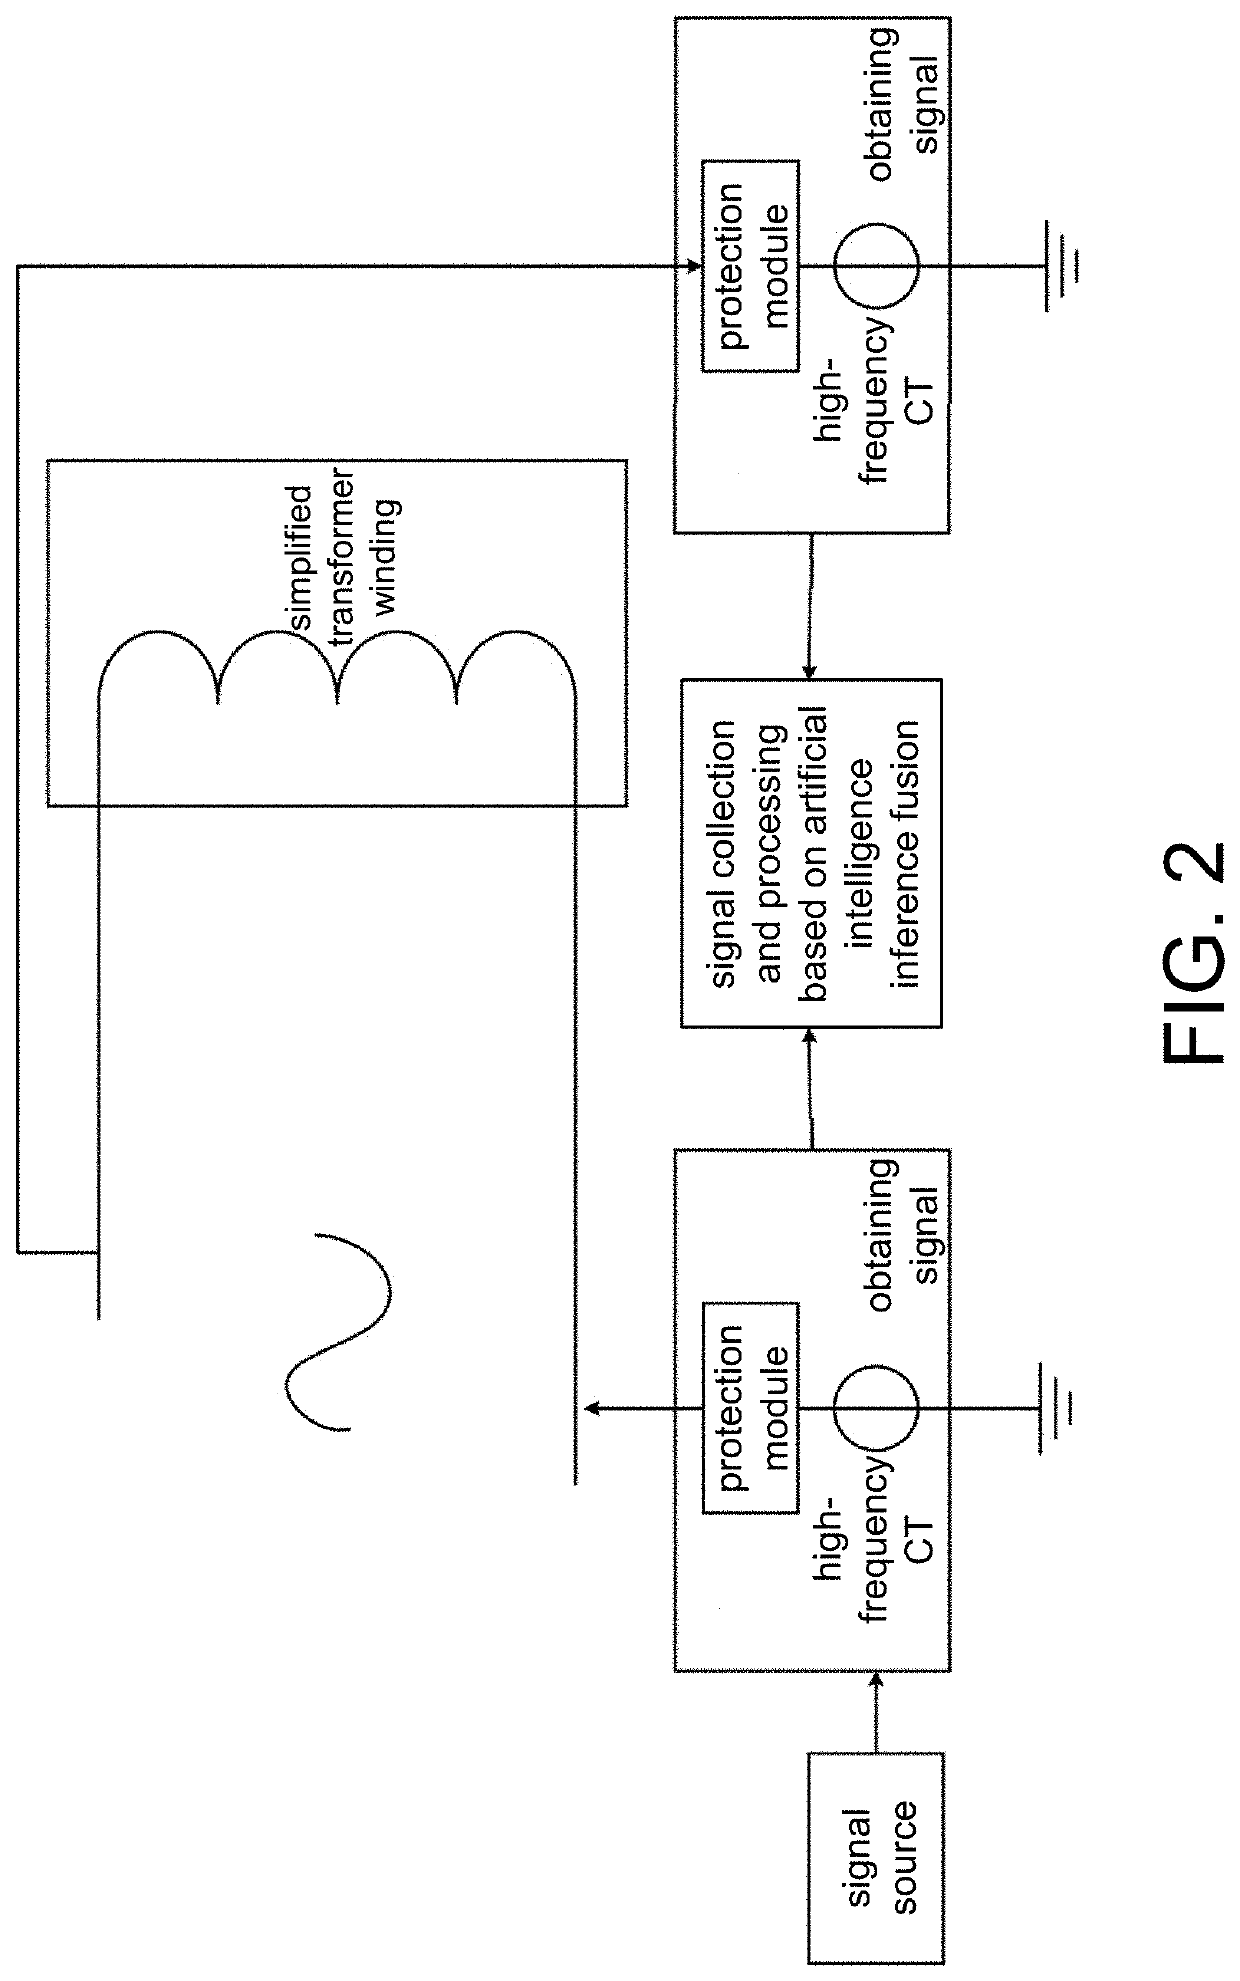 Power equipment fault detecting and positioning method of artificial intelligence inference fusion